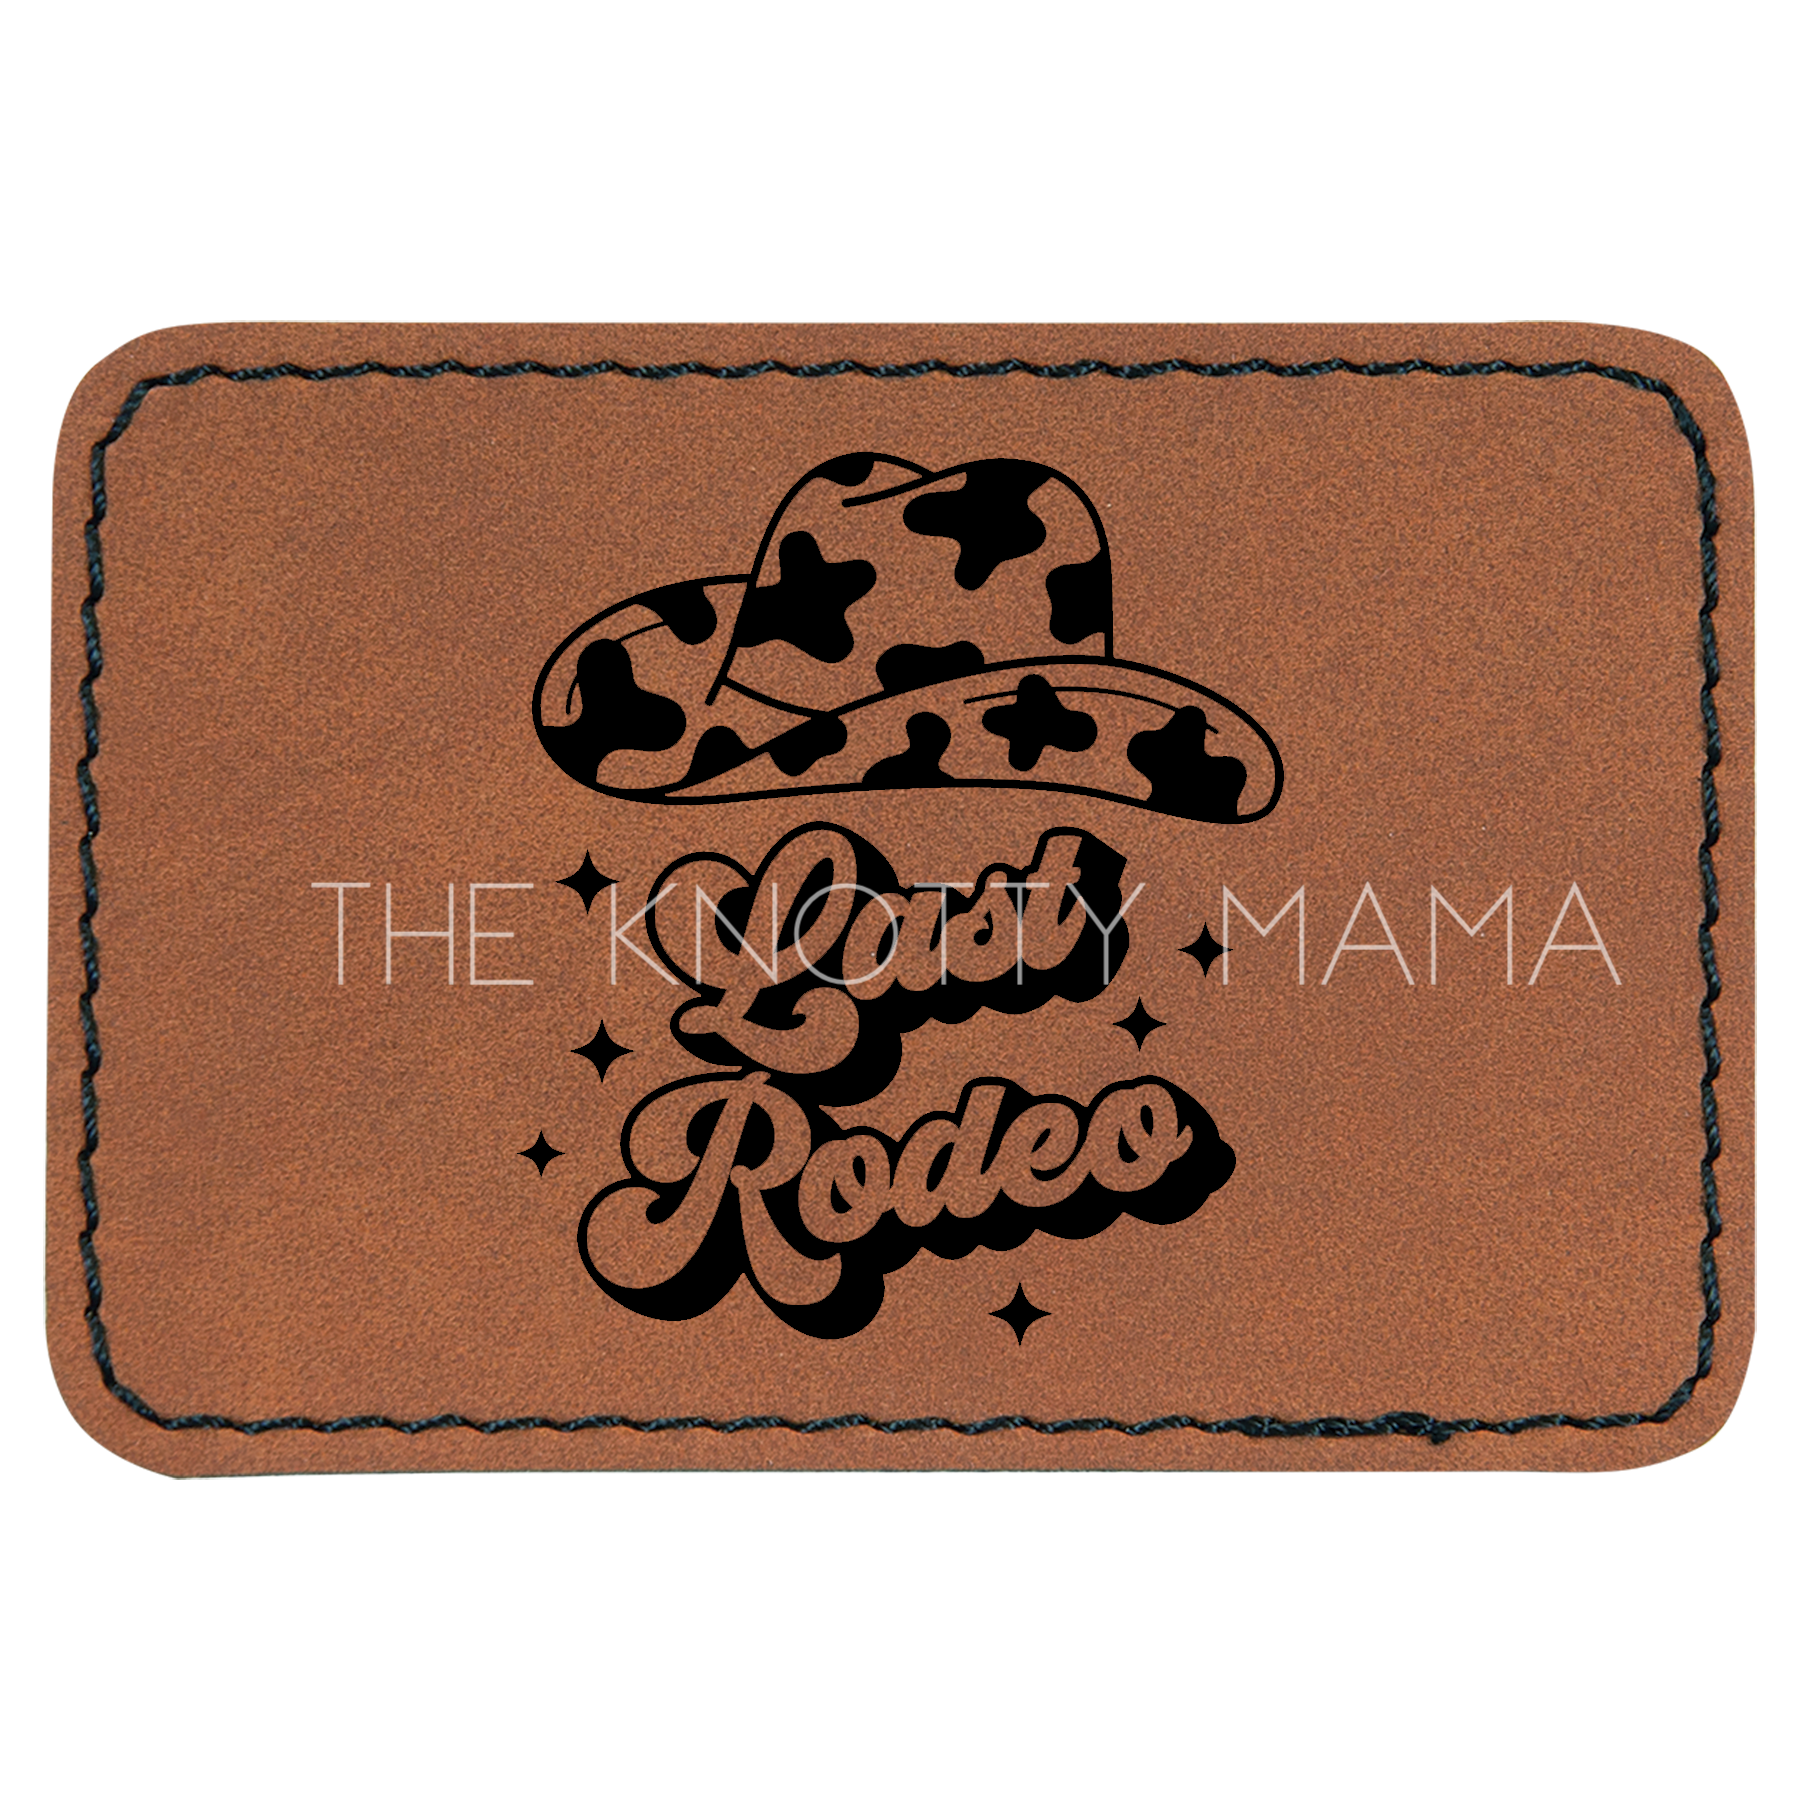 Last Rodeo Patch